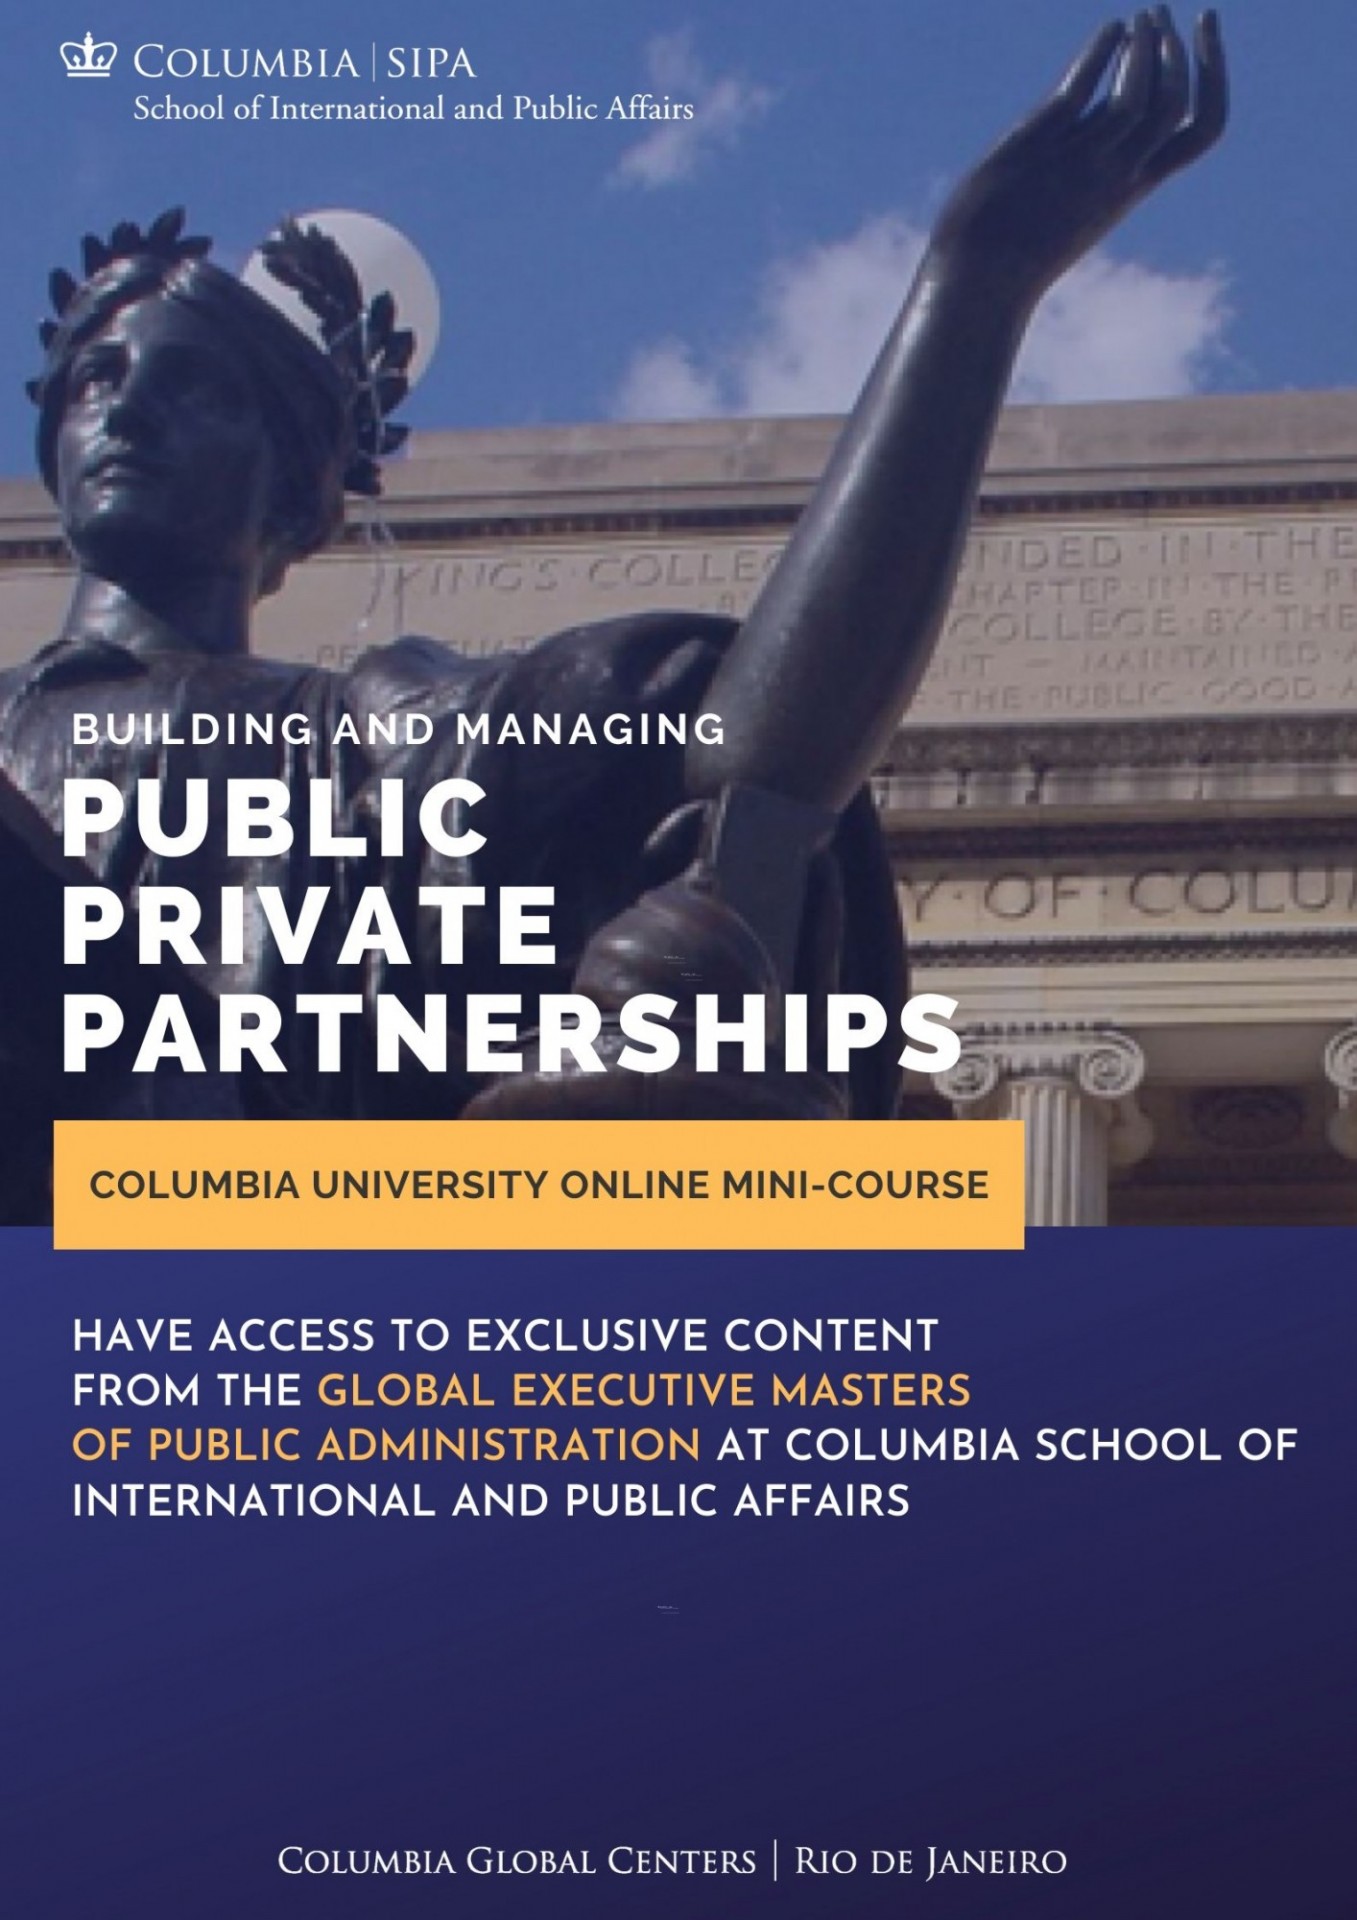 Columbia SIPA Online Course